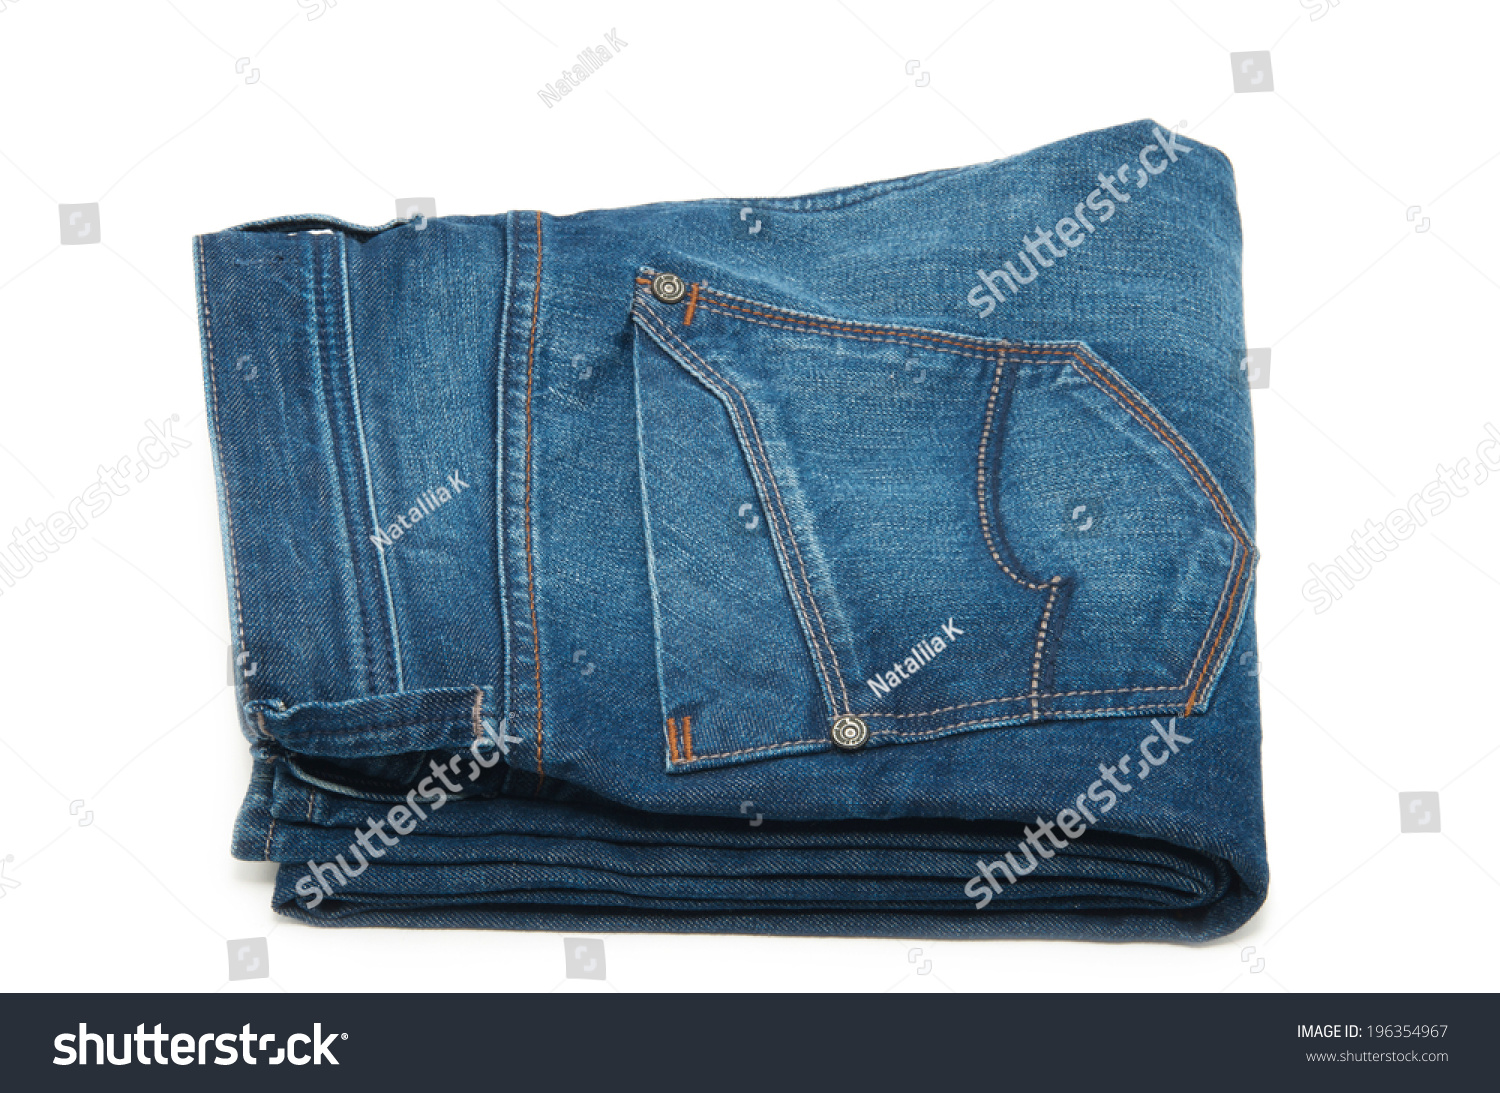 pair of blue jeans on a white background #196354967